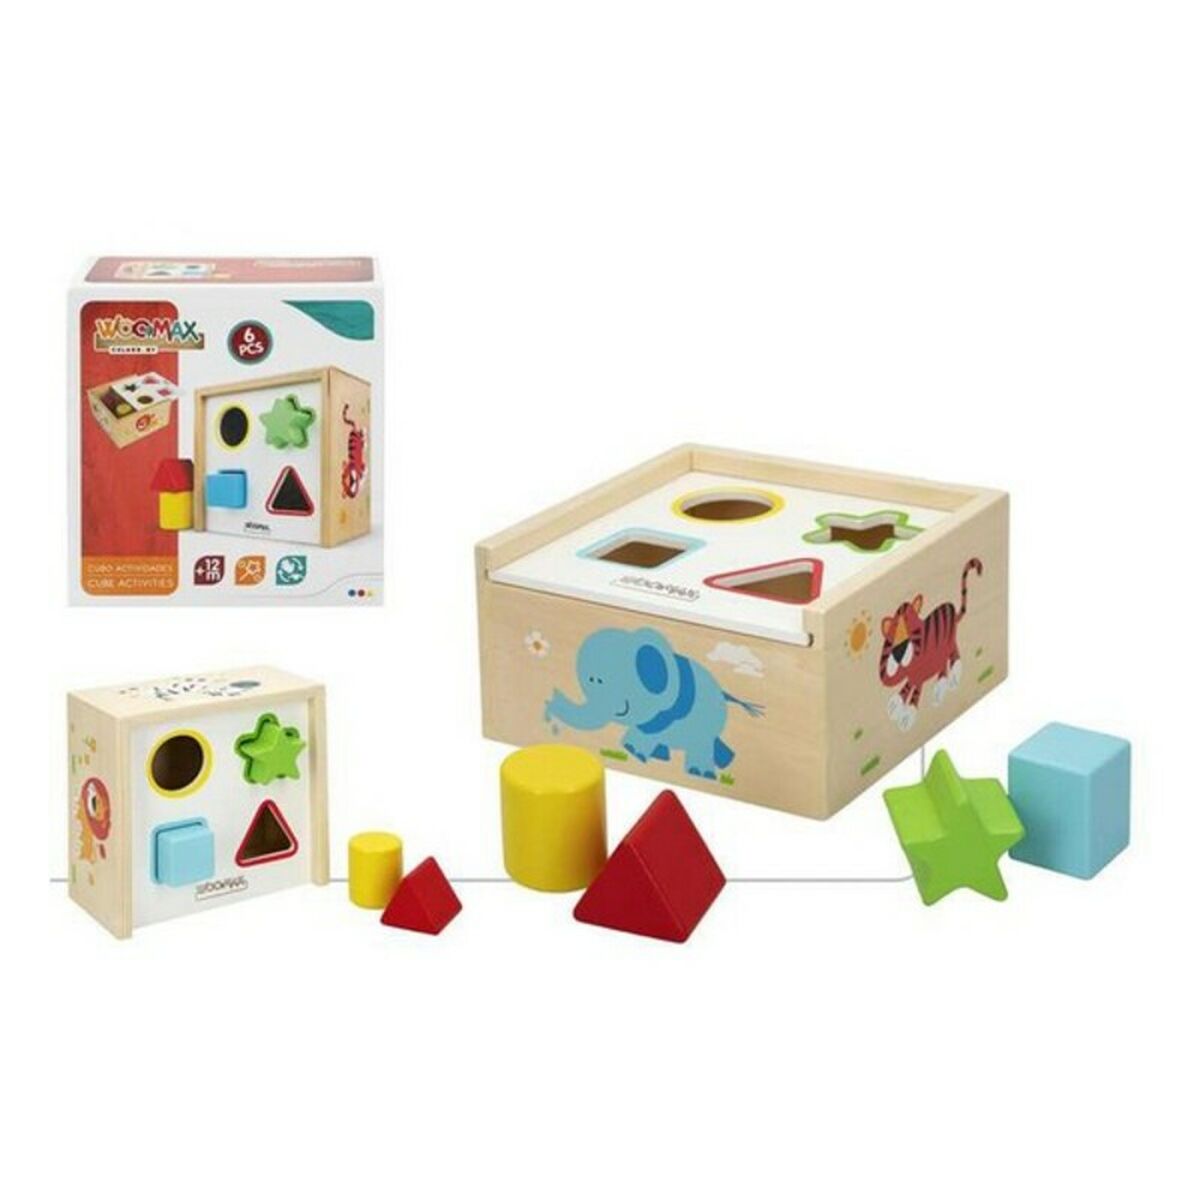 Wooden Game Woomax (6 pcs)